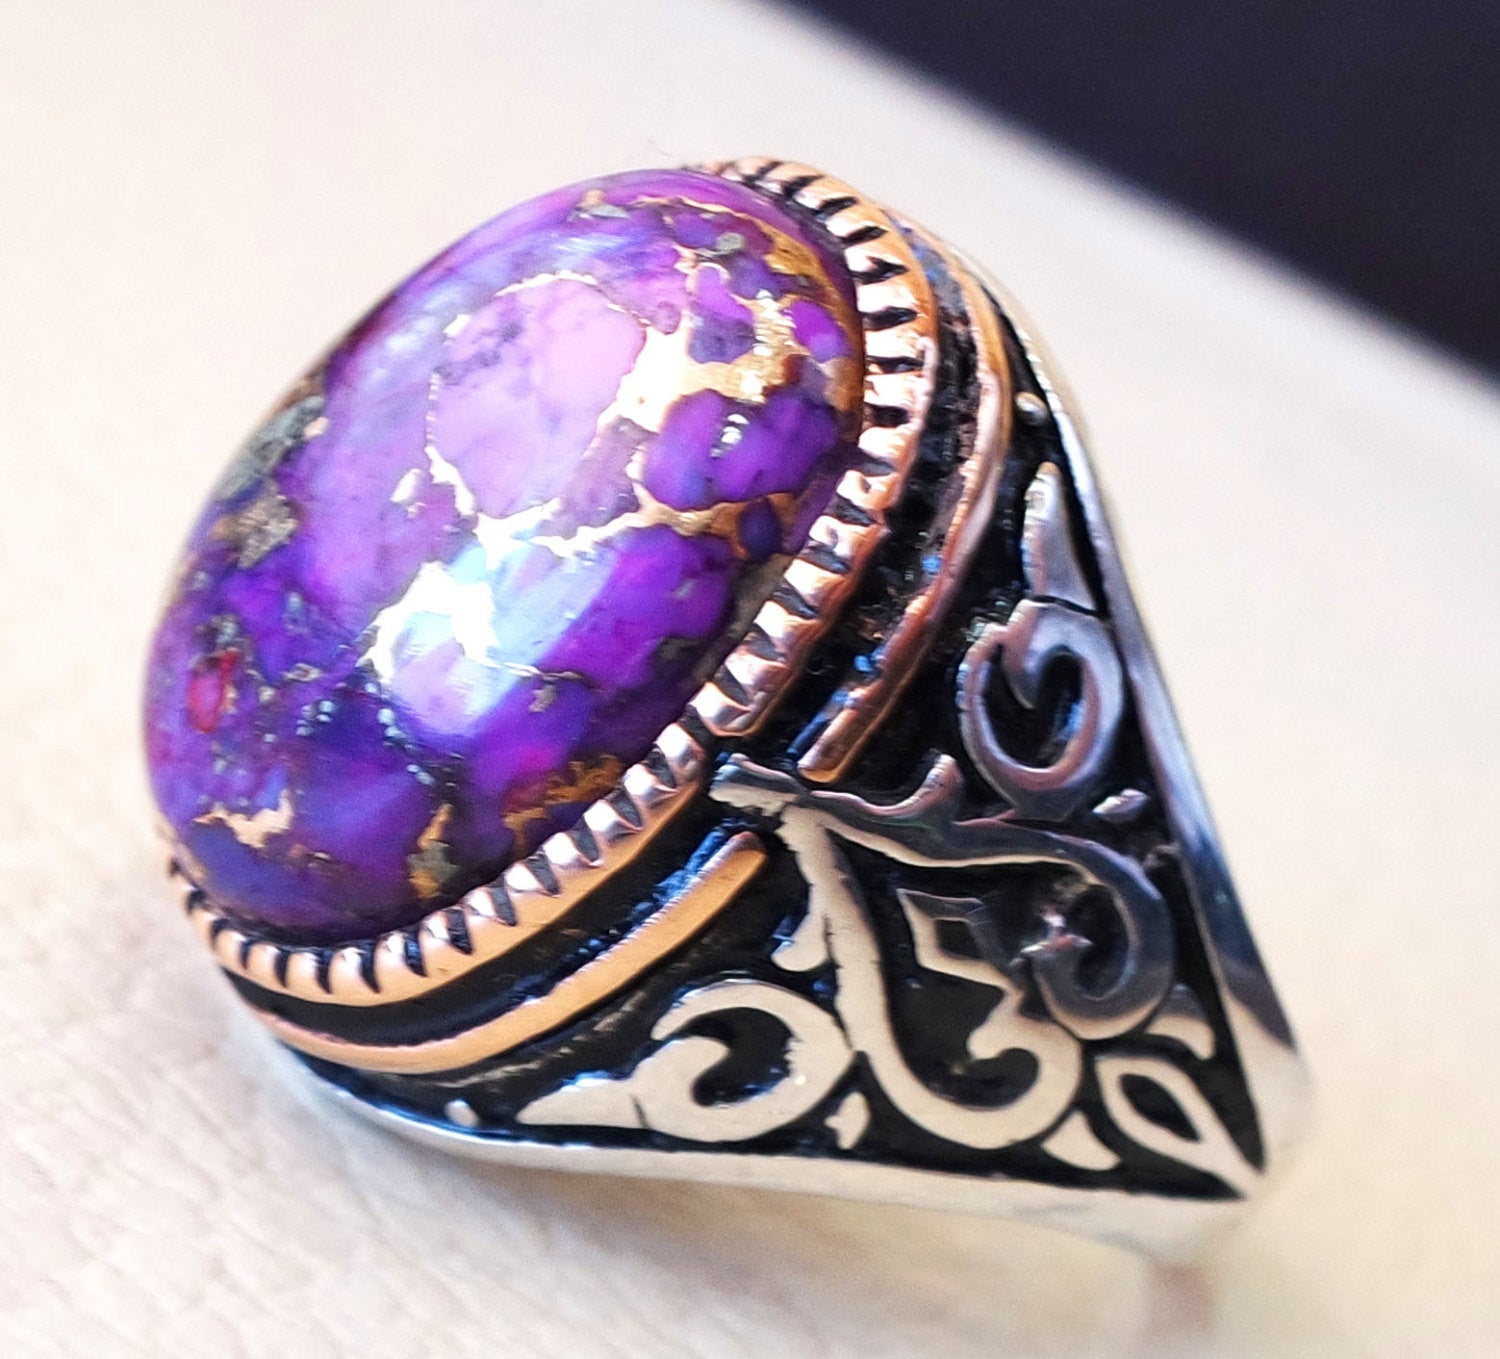 ottoman style heavy ring men sterling silver 925 jewelry copper purple turquoise high quality semi precious natural stone in bronze frame